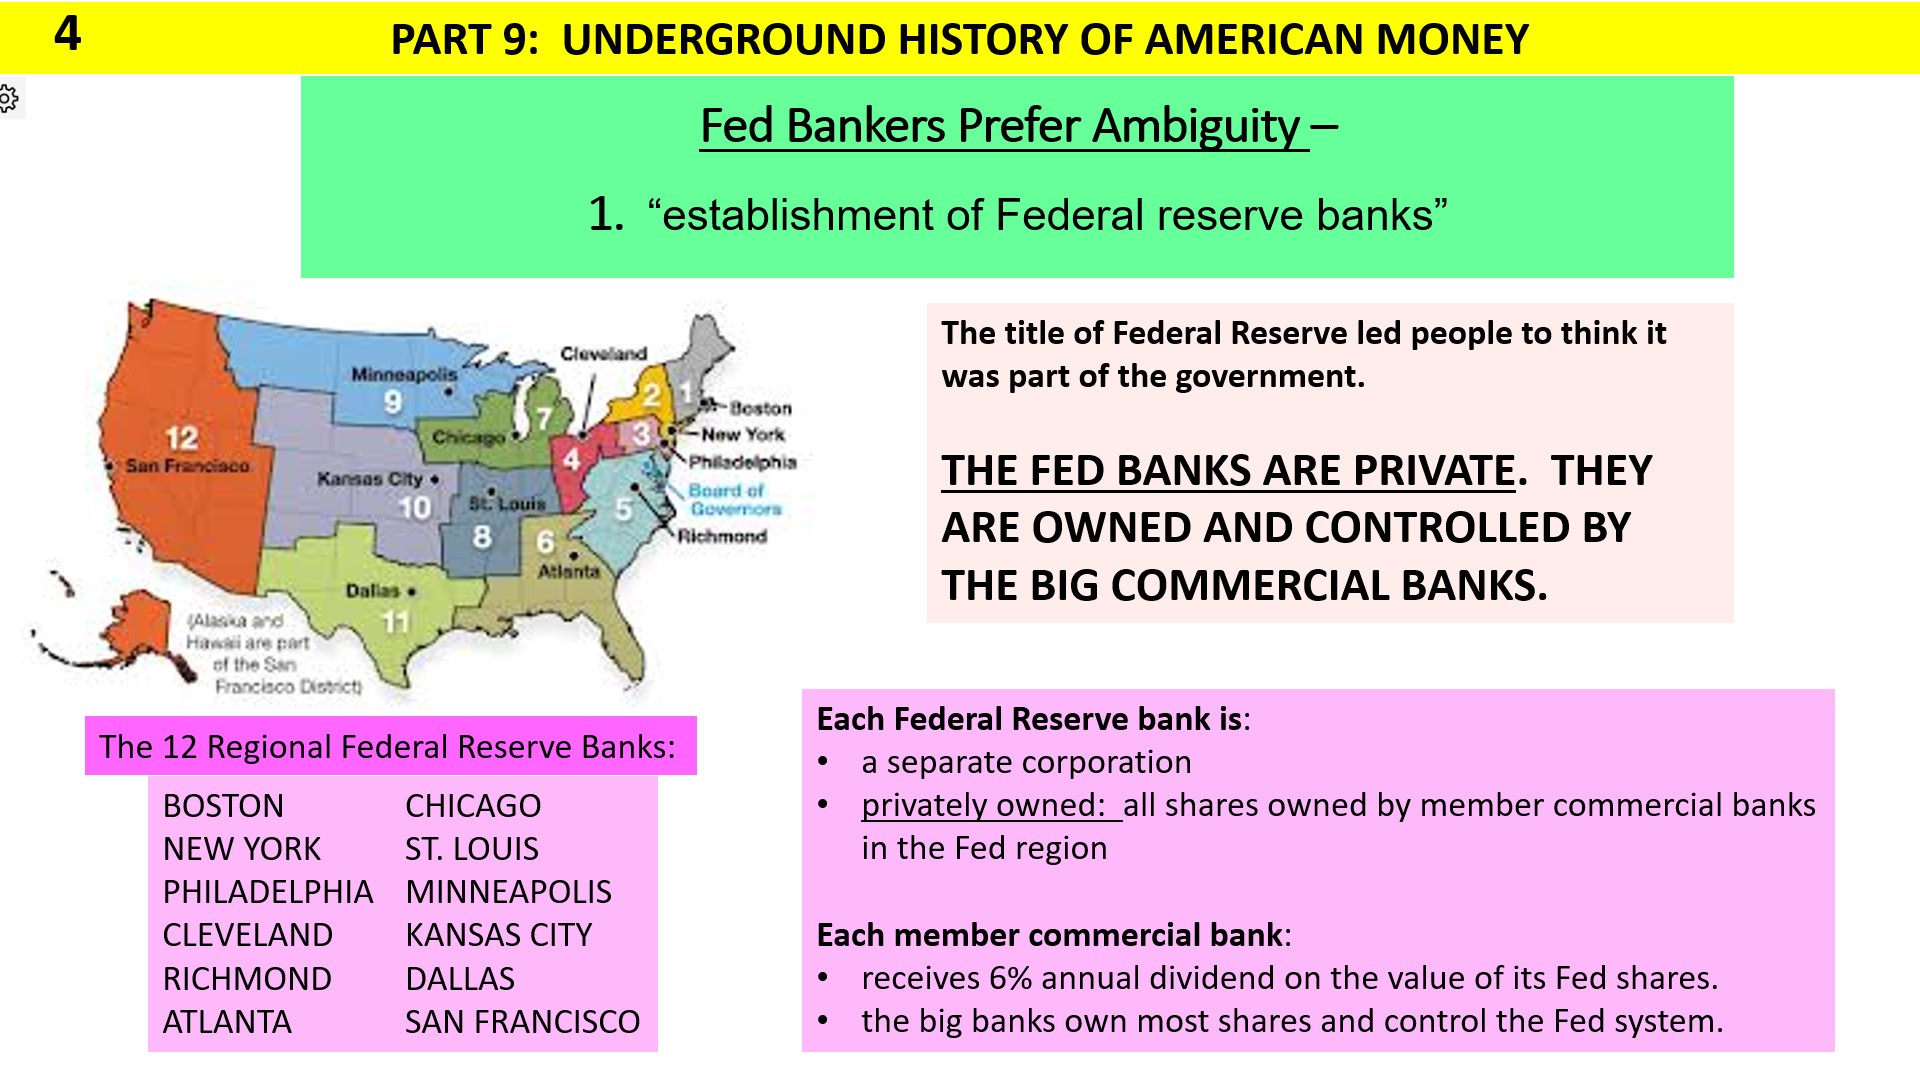 Establishment of the Federal Reserve Regional Banks, which are private and owned by large commerdial banks